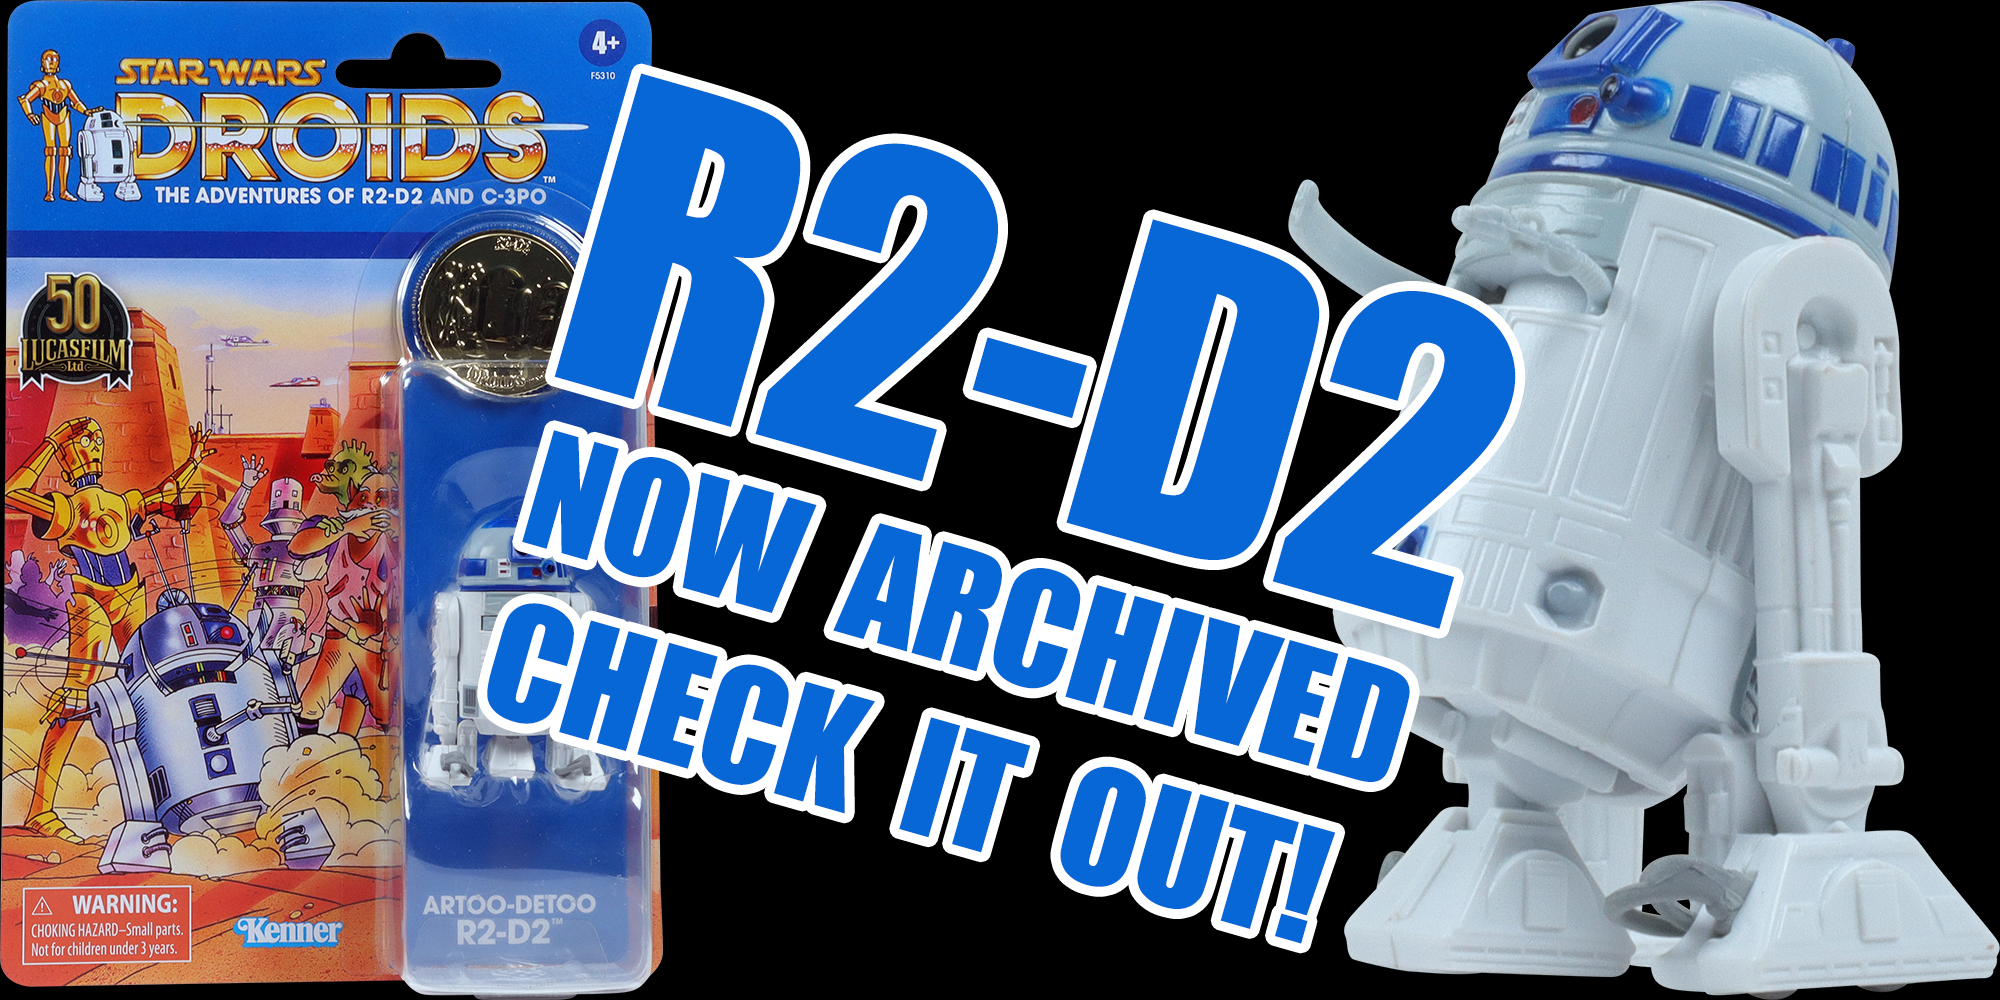 Target Exclusive R2-D2 (Star Wars Droids) Archived